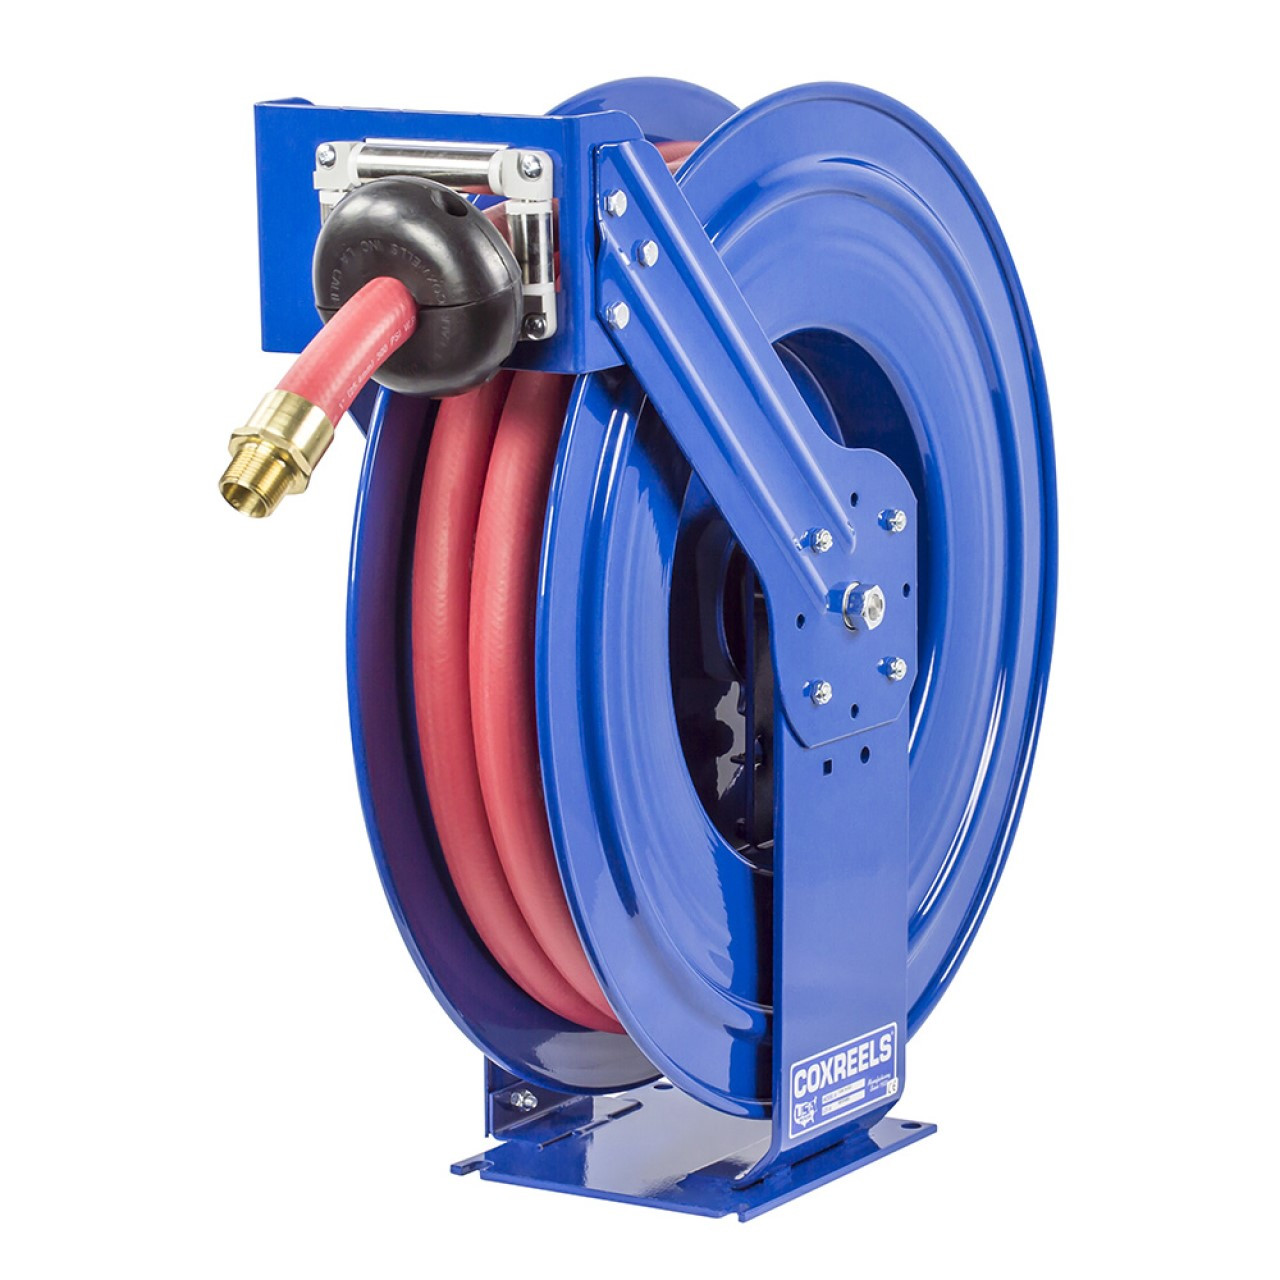 Retractable Fuel Hose Reel with Refueling Nozzle 1 x 50ft Spring Driven  Diesel Hose Reel 300 PSI Industrial Auto Swivel Heavy Duty Steel  Construction